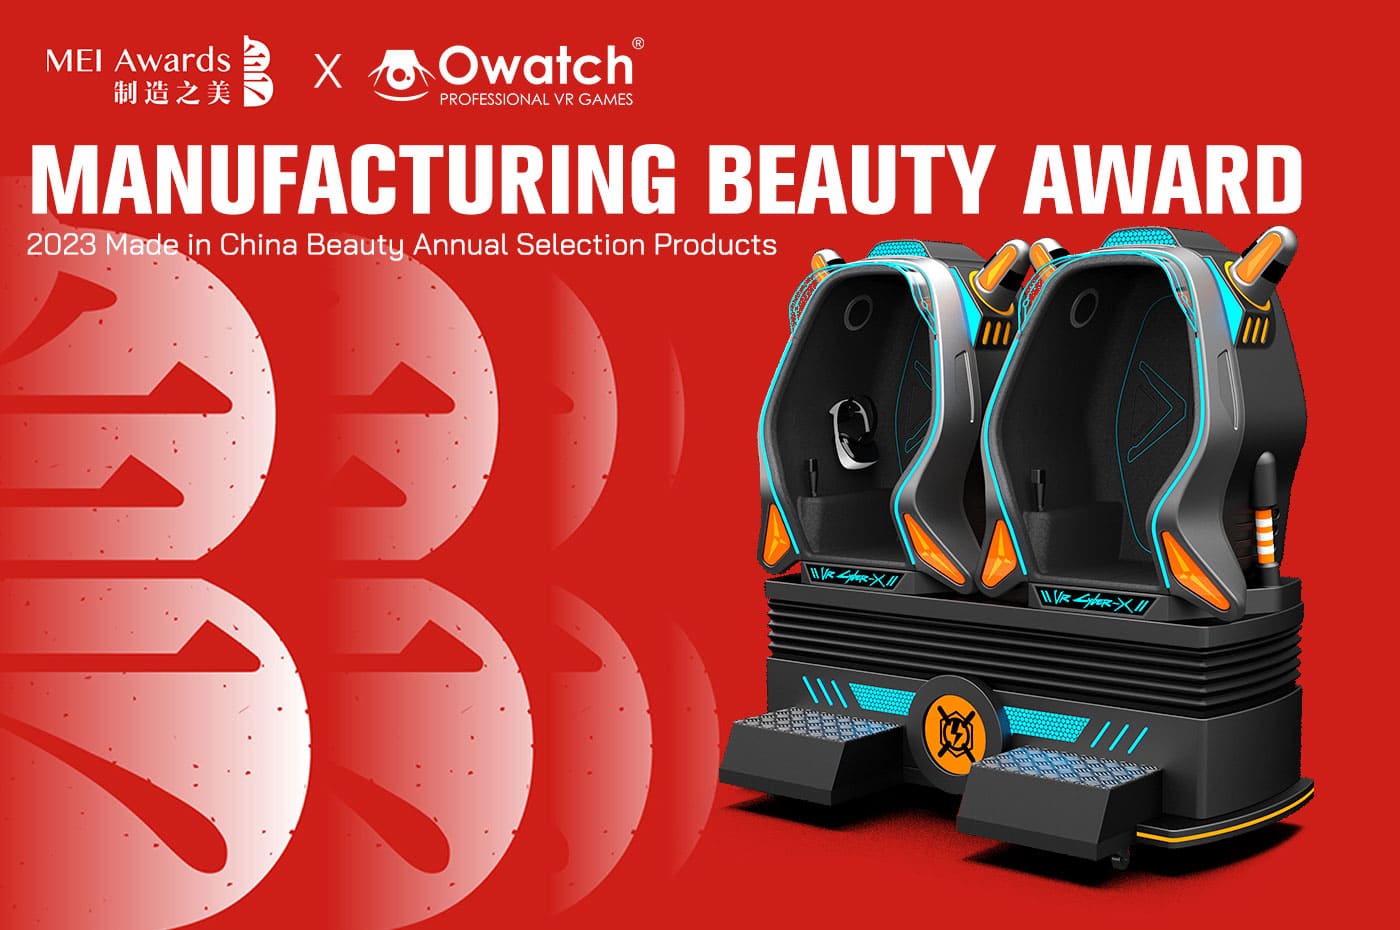 VR Cyber-X won the Manufacturing Beauty Award and the Design Award